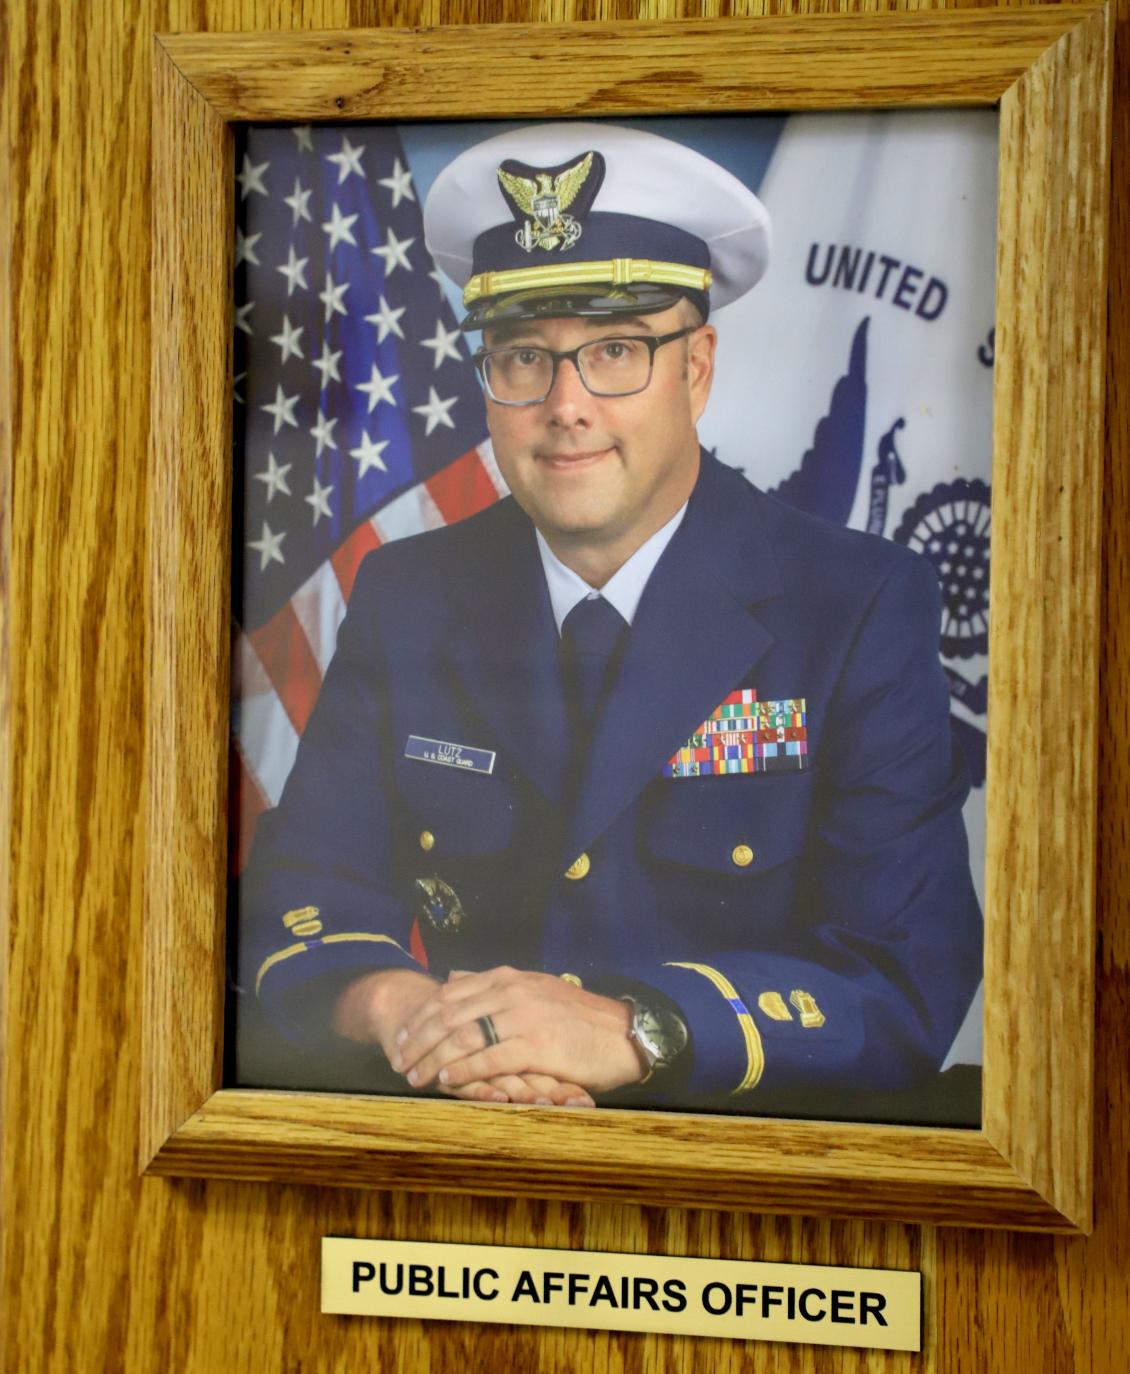 Cape May Coast Guard Training Center - Public Affairs Officer CWO-4 Michael Lutz